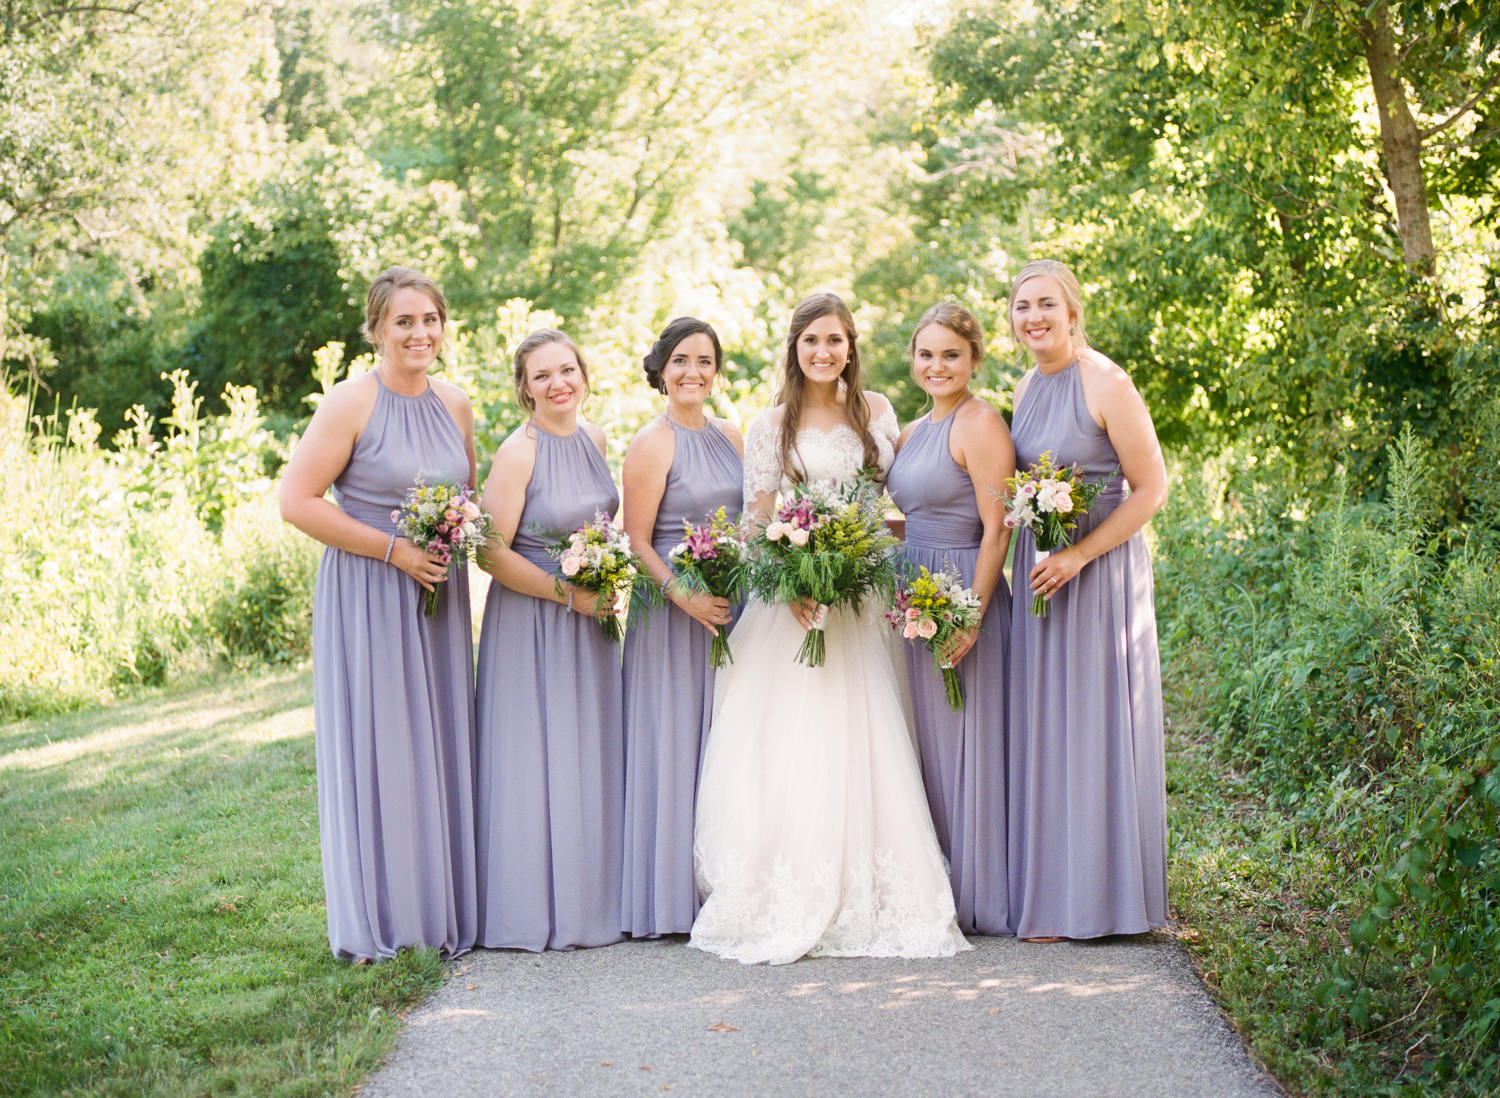 Bride and bridesmaids in lavender dresses; St. Louis wedding photographer